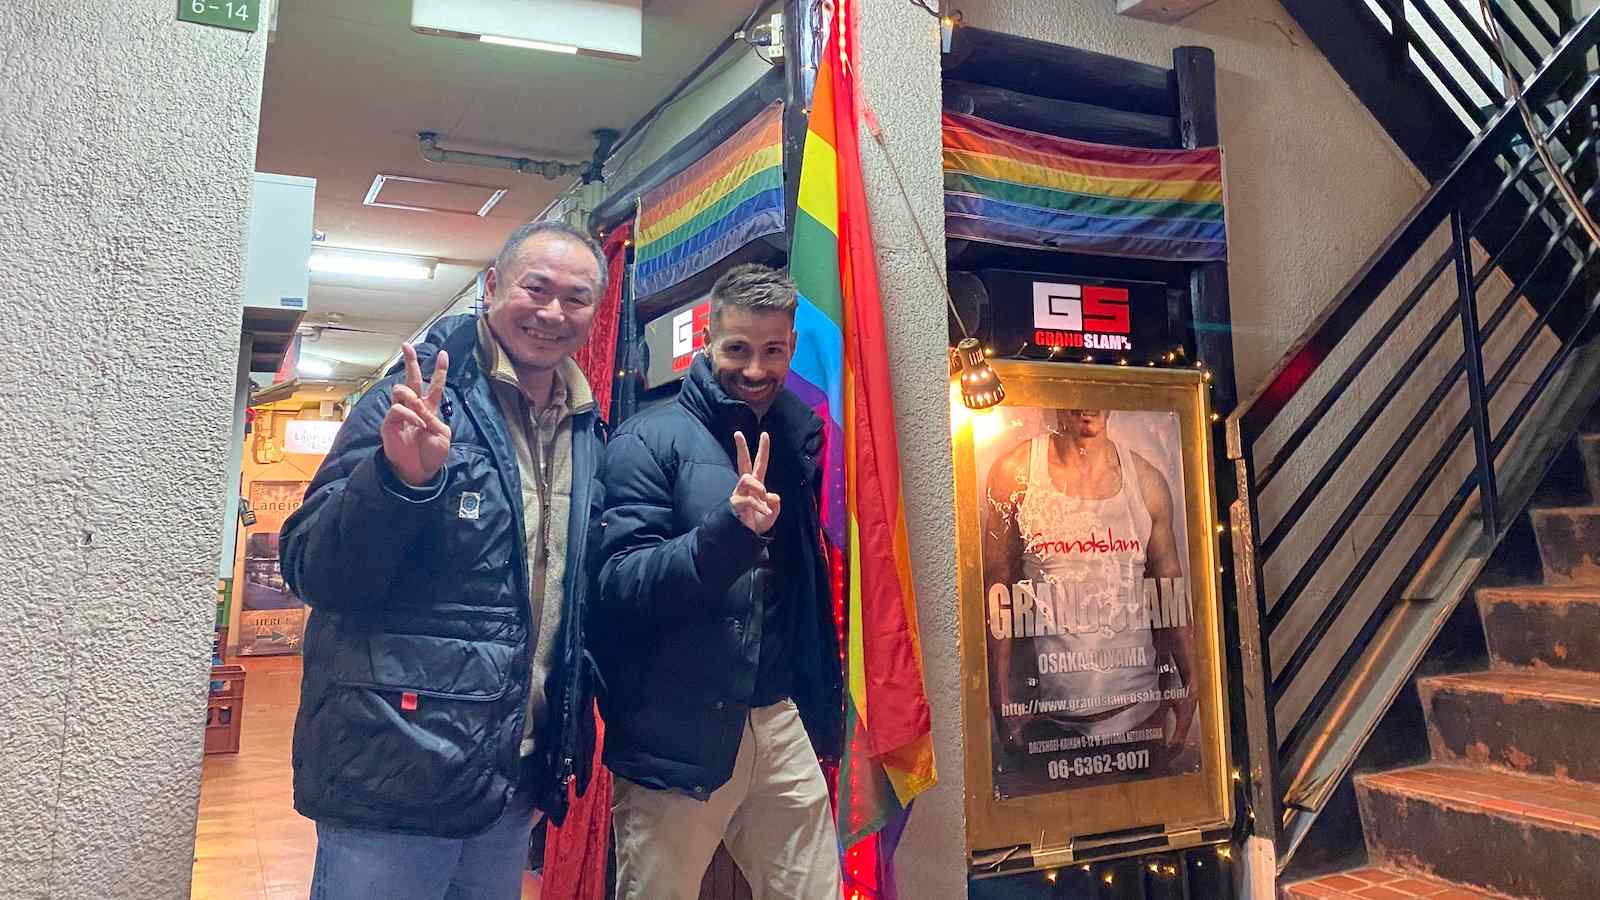 There are some great gay bars and clubs in both Osaka and Tokyo in Japan